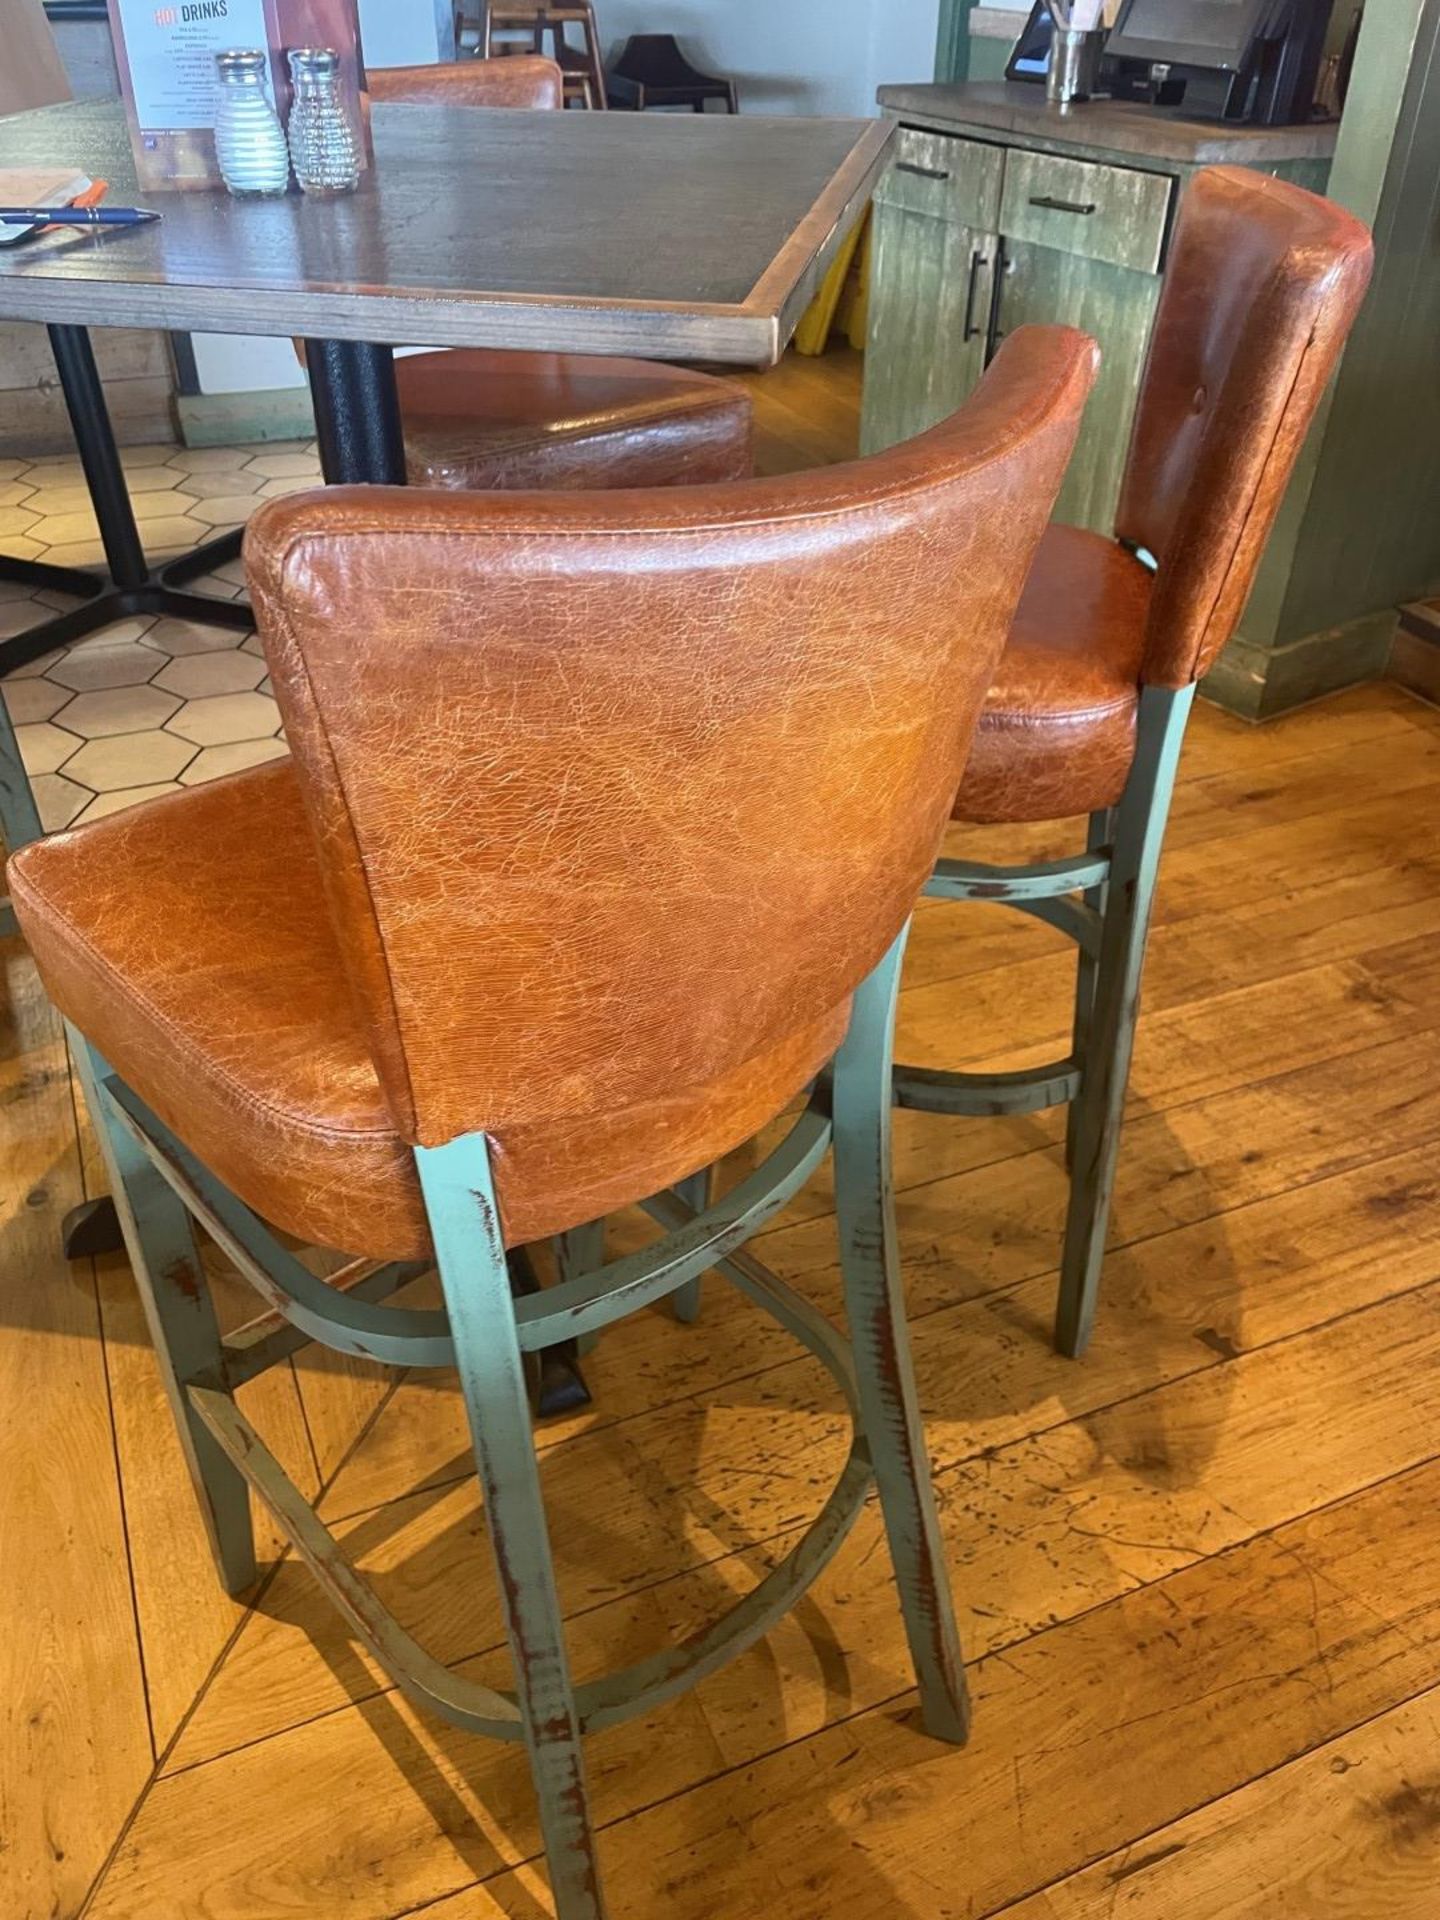 4 x Commercial Restaurant Bar Stools Featuring Wooden Frames With a Distressed Finish and Tan - Image 9 of 15